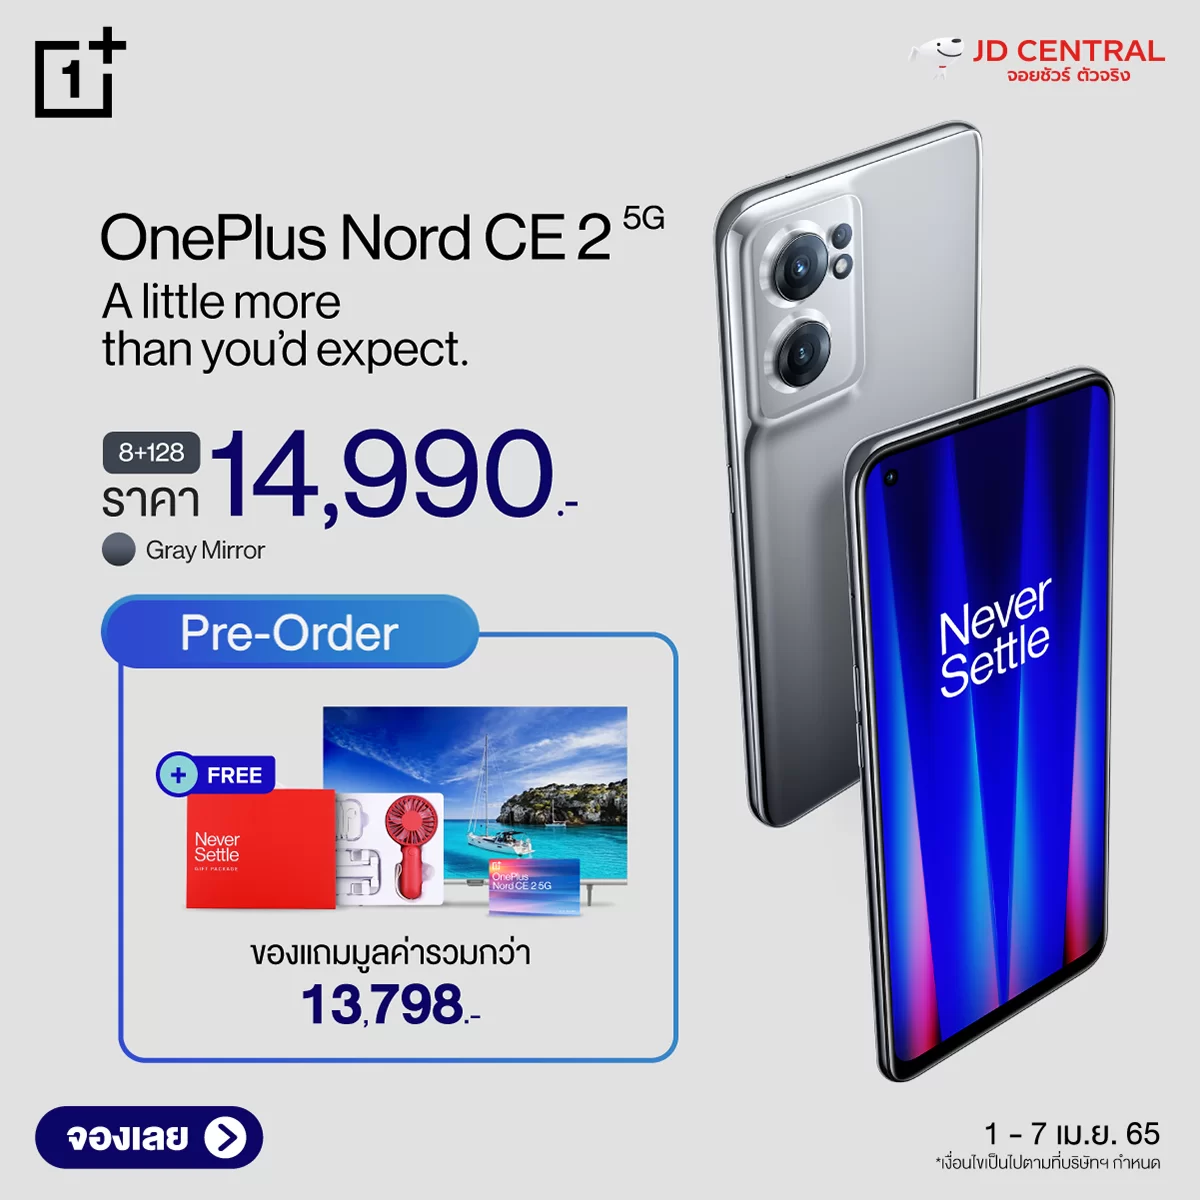 Ads-Feed-KV-OnePlus-Nord-CE-2-5G-Pre-Order-@JD-RT